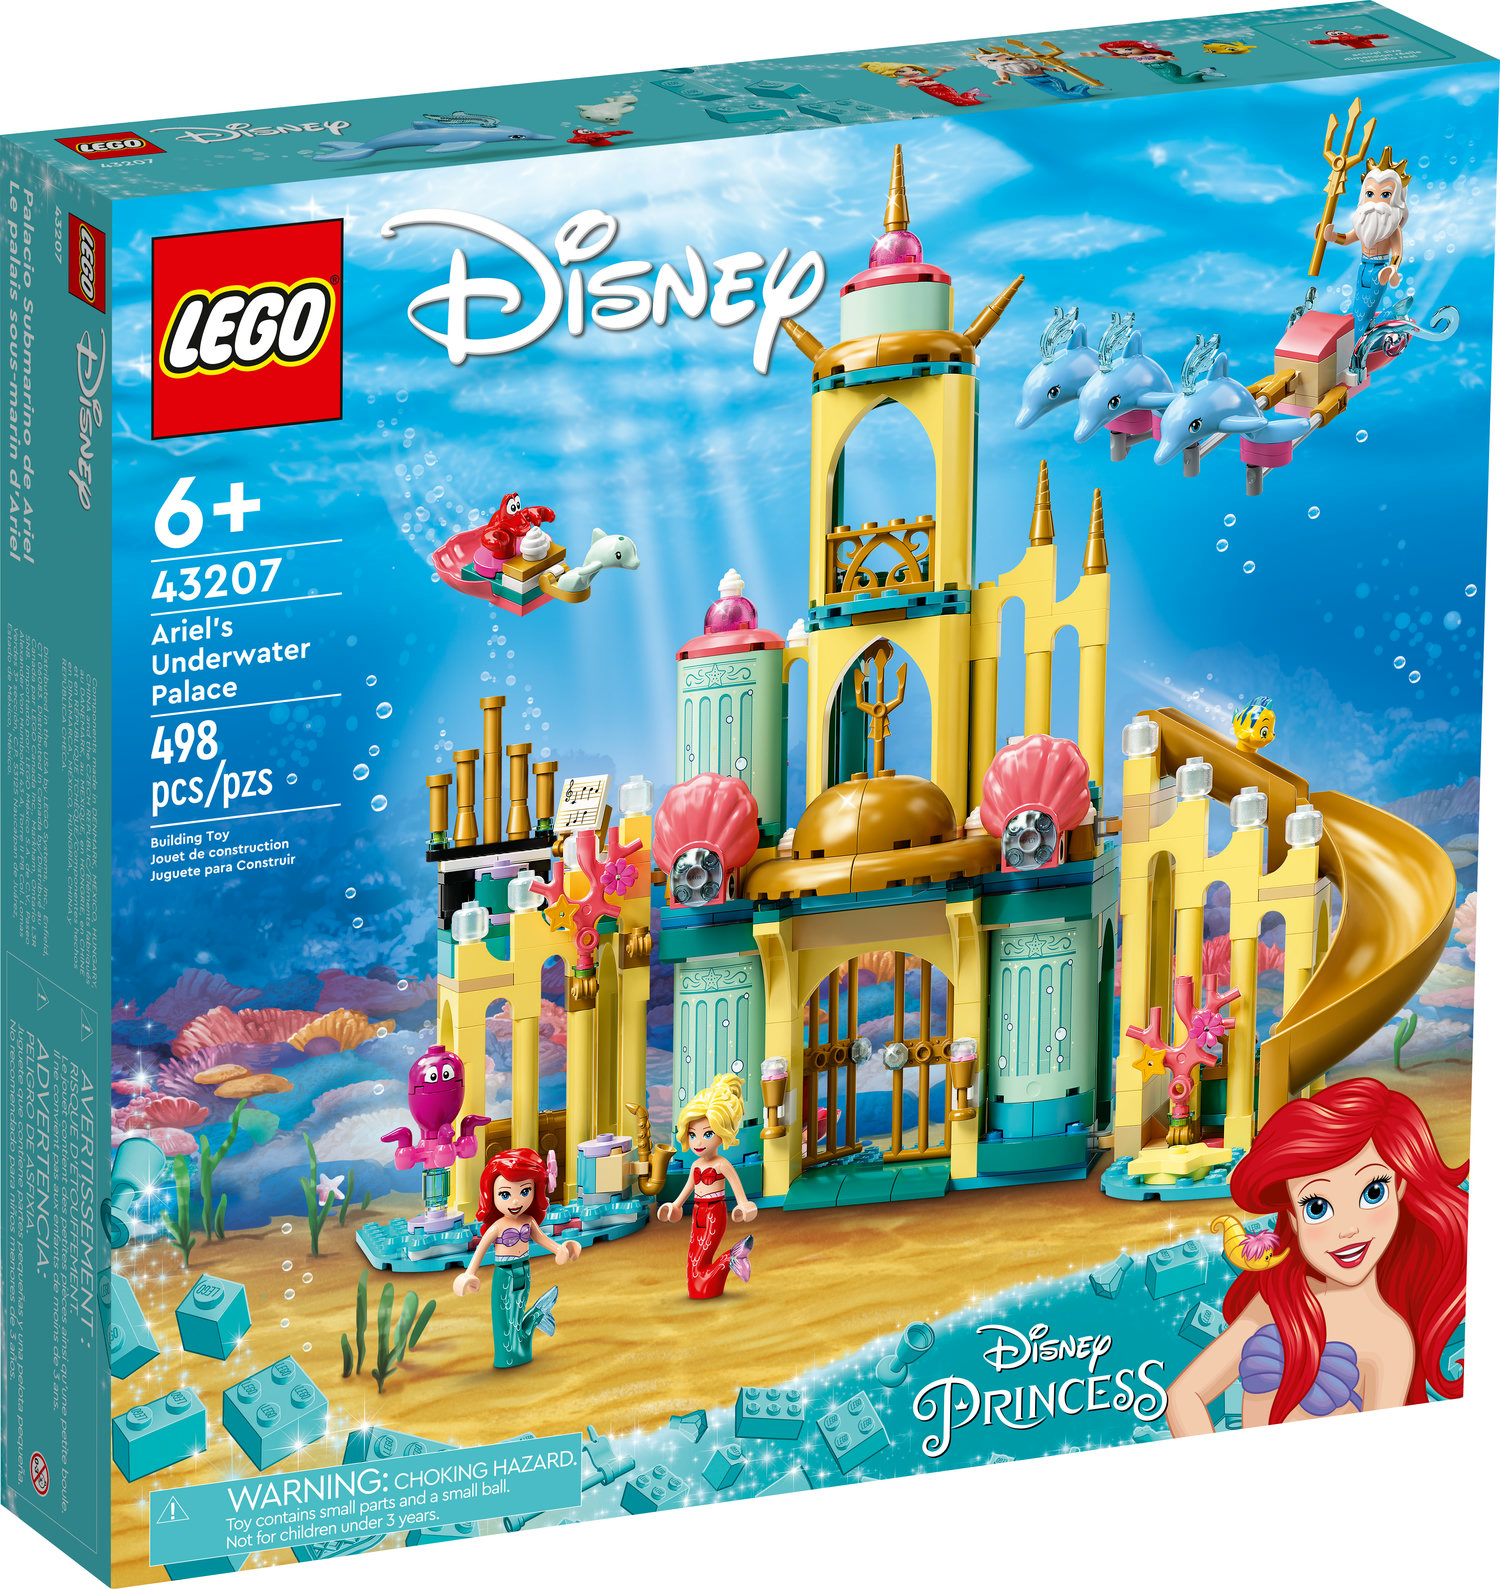 LEGO Disney Princess Ariel’s Underwater Palace 43207, Buildable Princess Castle Toy, Disney Gift Idea for Kids, Girls and Boys Aged 6+ with The Little Mermaid Mini-Doll Figure & Dolphin Figures - image 4 of 10